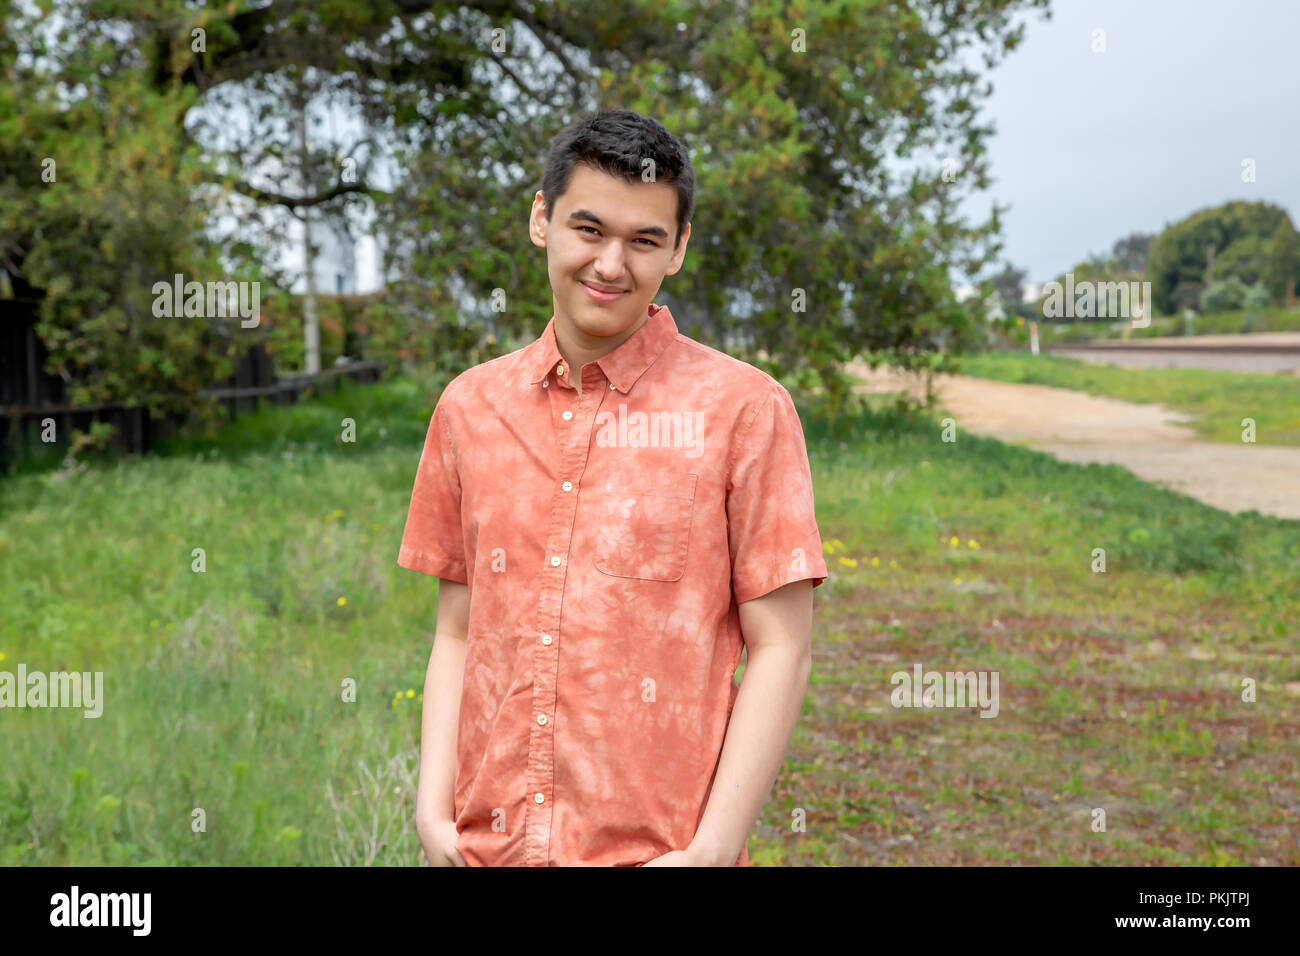 A 22 year old man standing outdoors with his hands in his pockets in Carlsbad, California Stock Photo